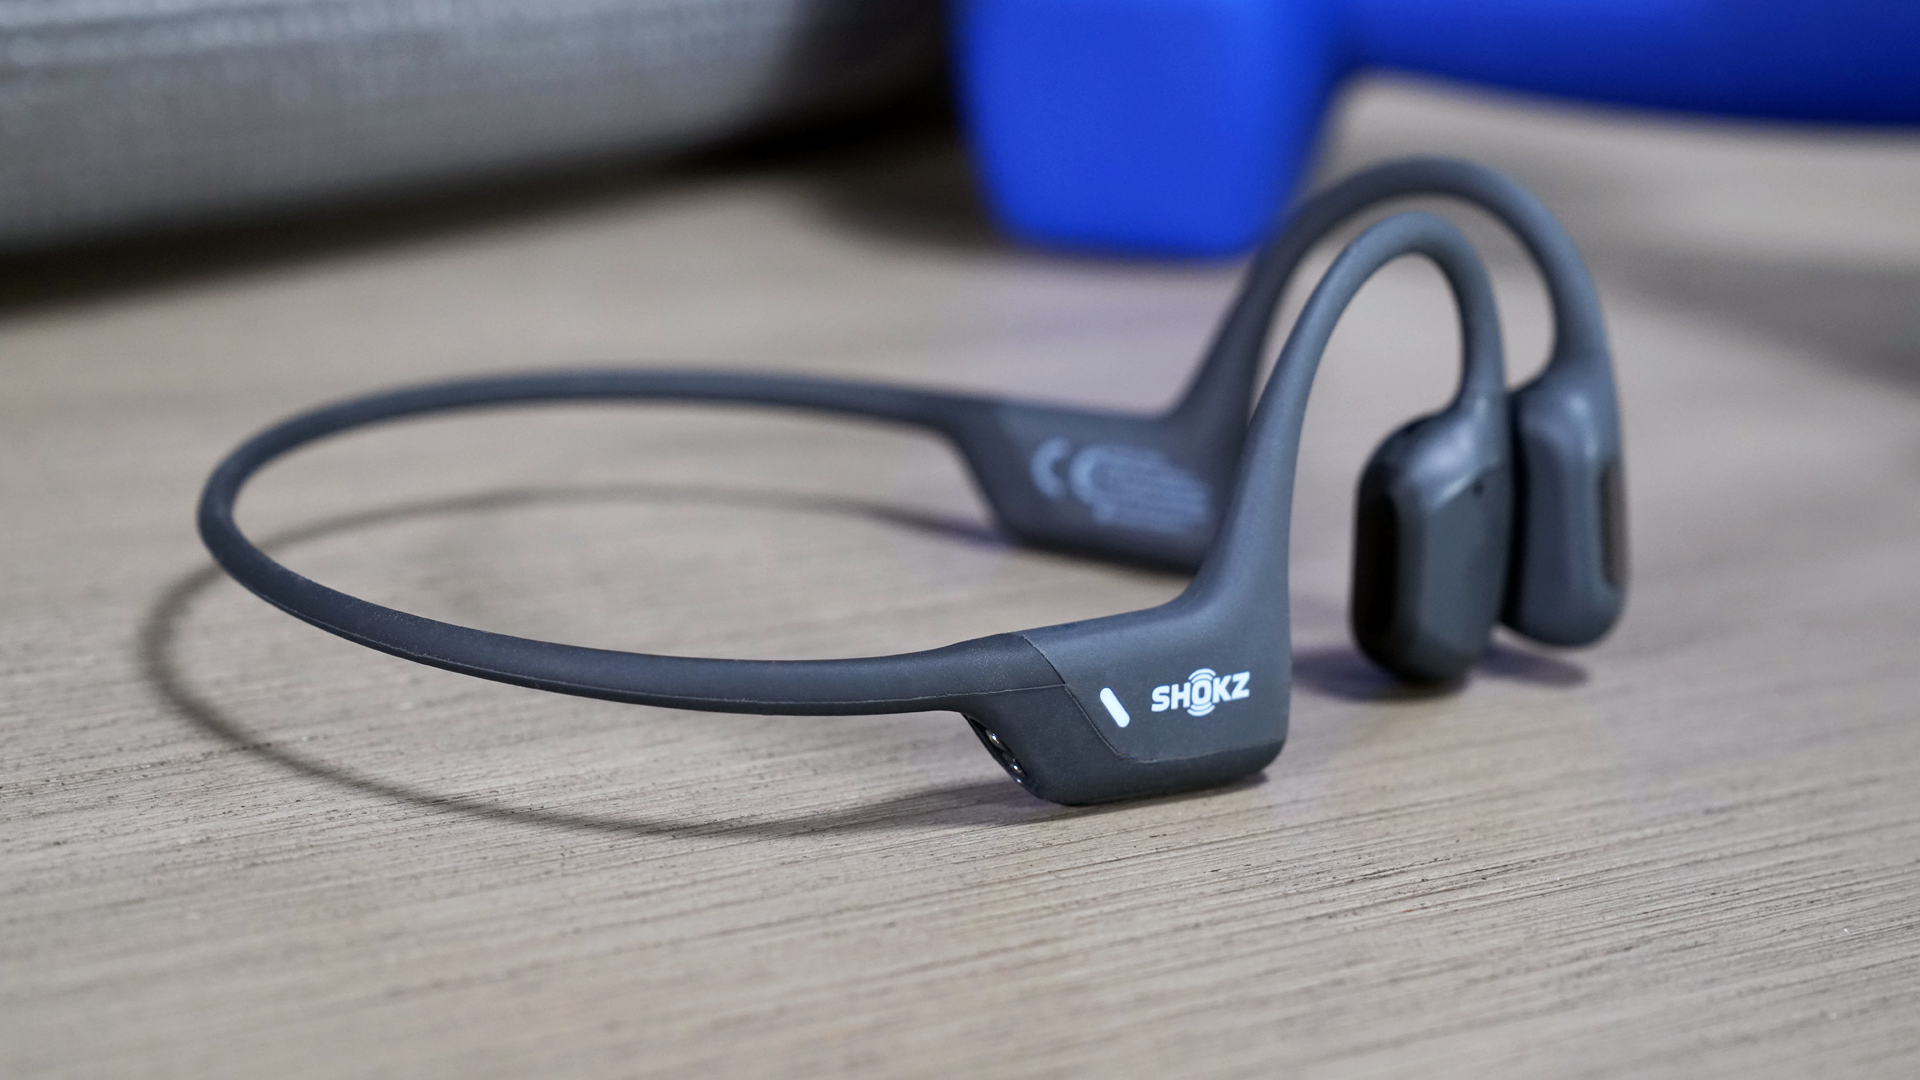 The Shokz OpenRun Pro bone conduction headphones view from the right, sitting on a table